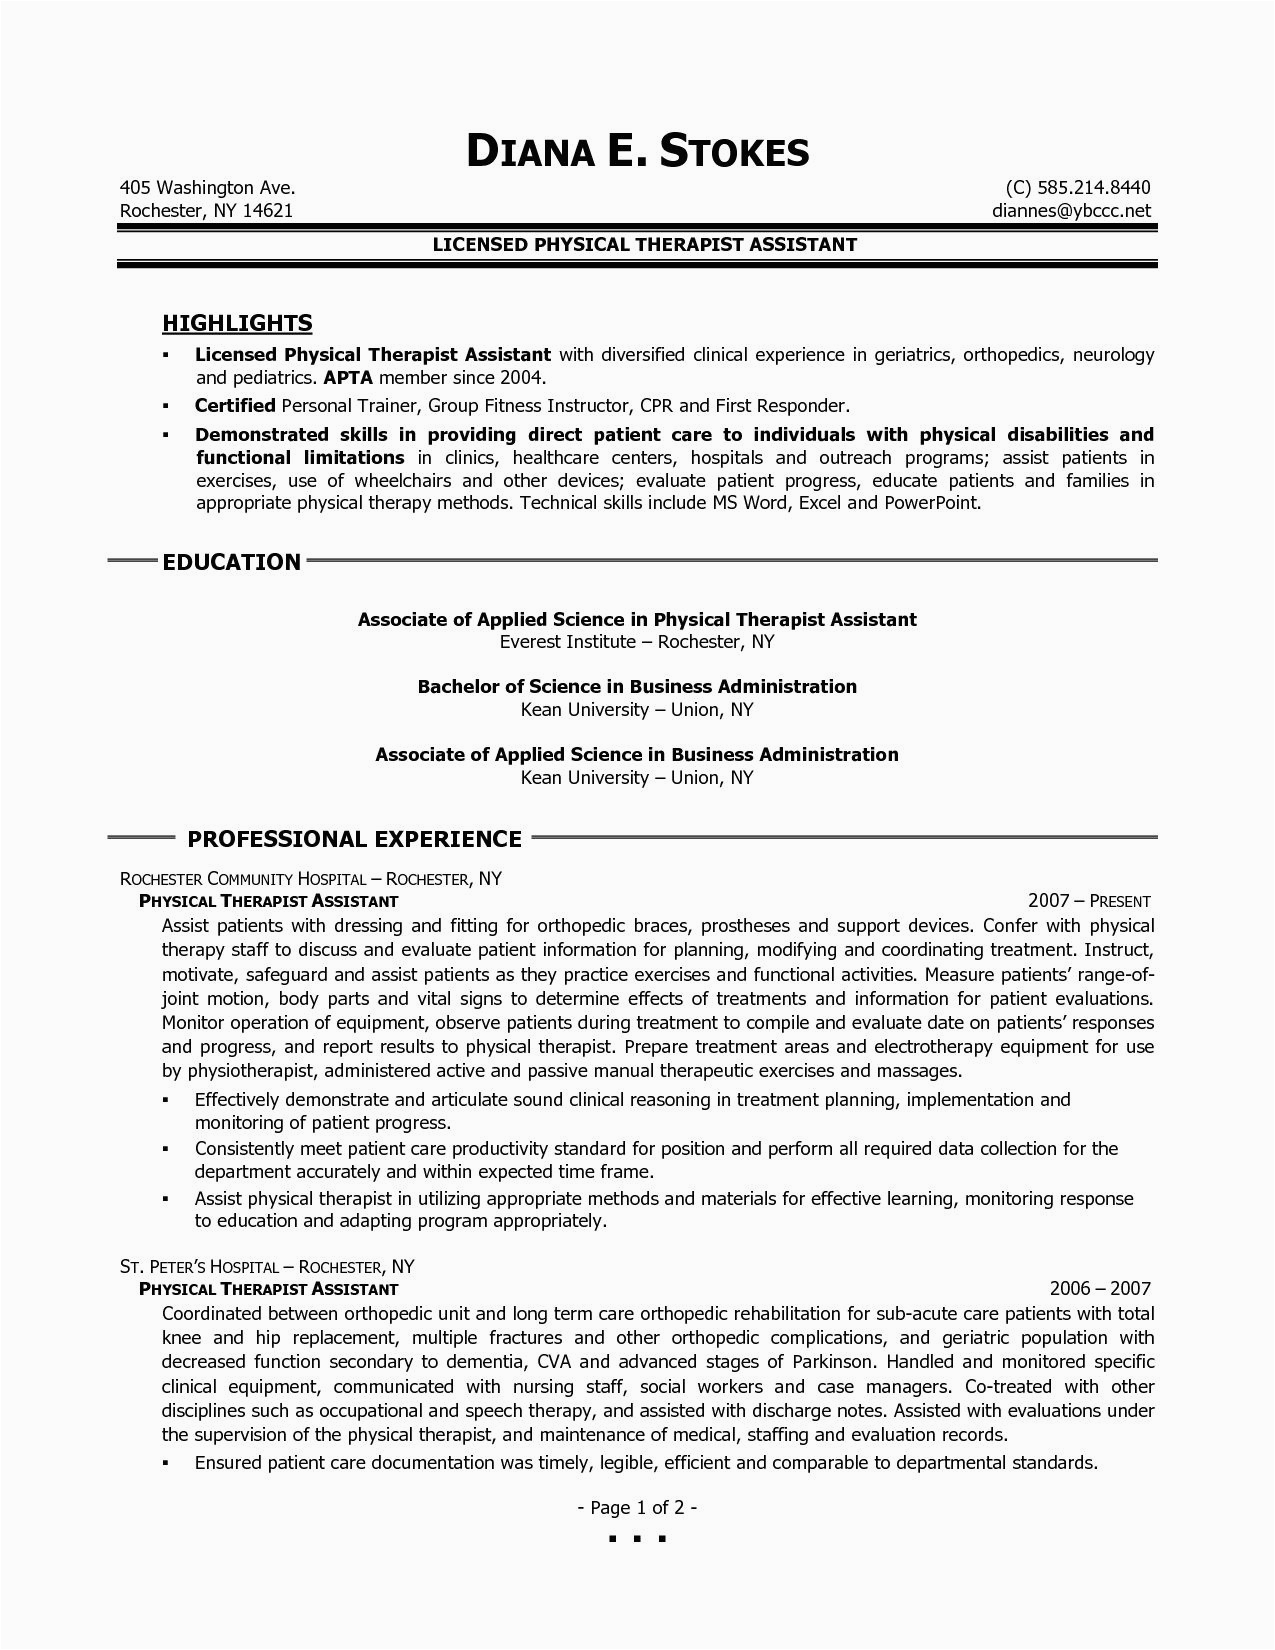 Physical therapy assistant Resume Templates New Graduate Physical therapist assistant Resume Skilled Nursing